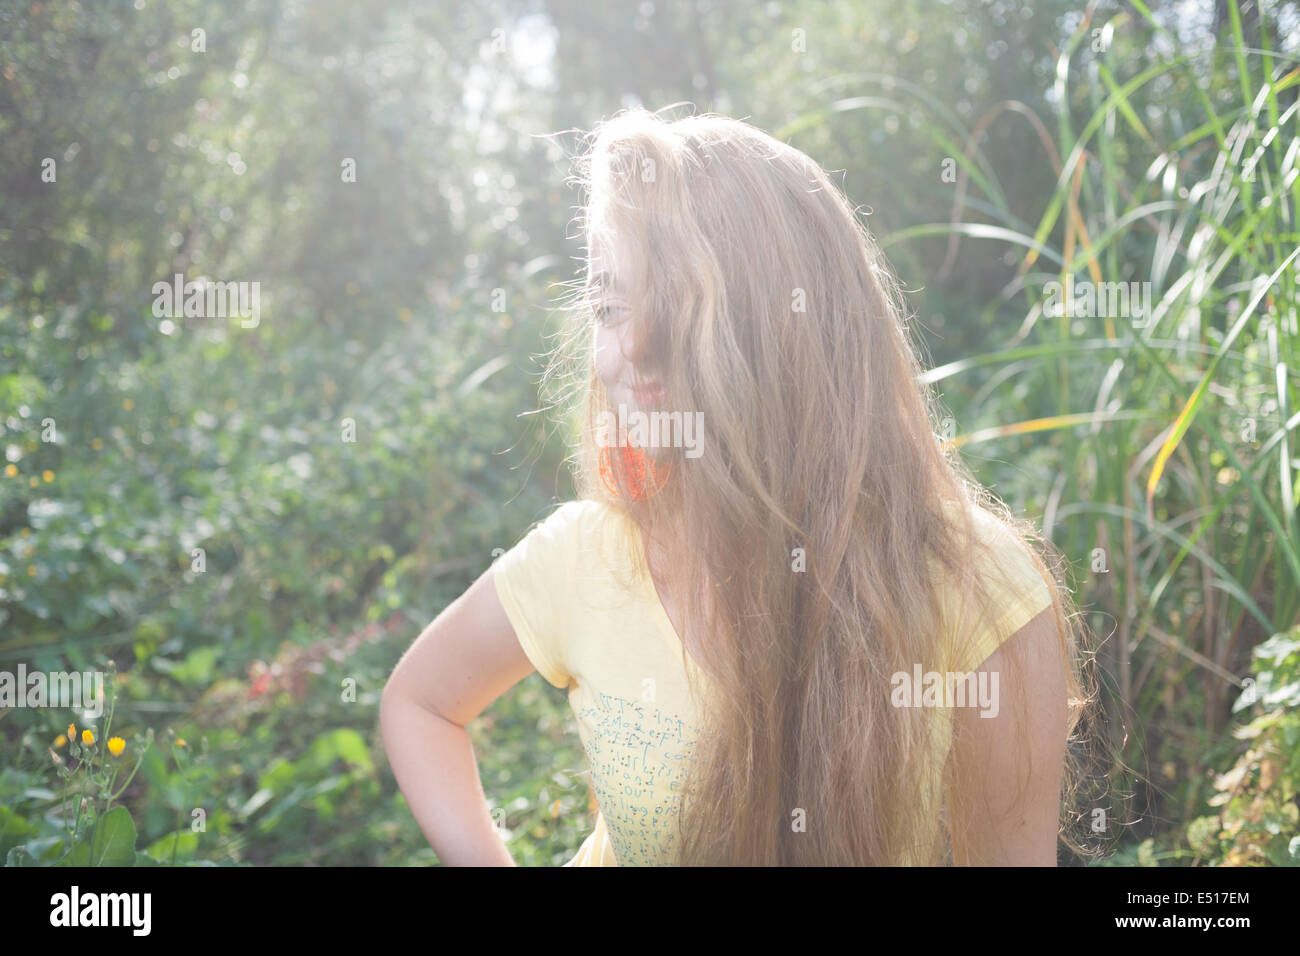 Pretty blonde outdoors. Colorized image Stock Photo